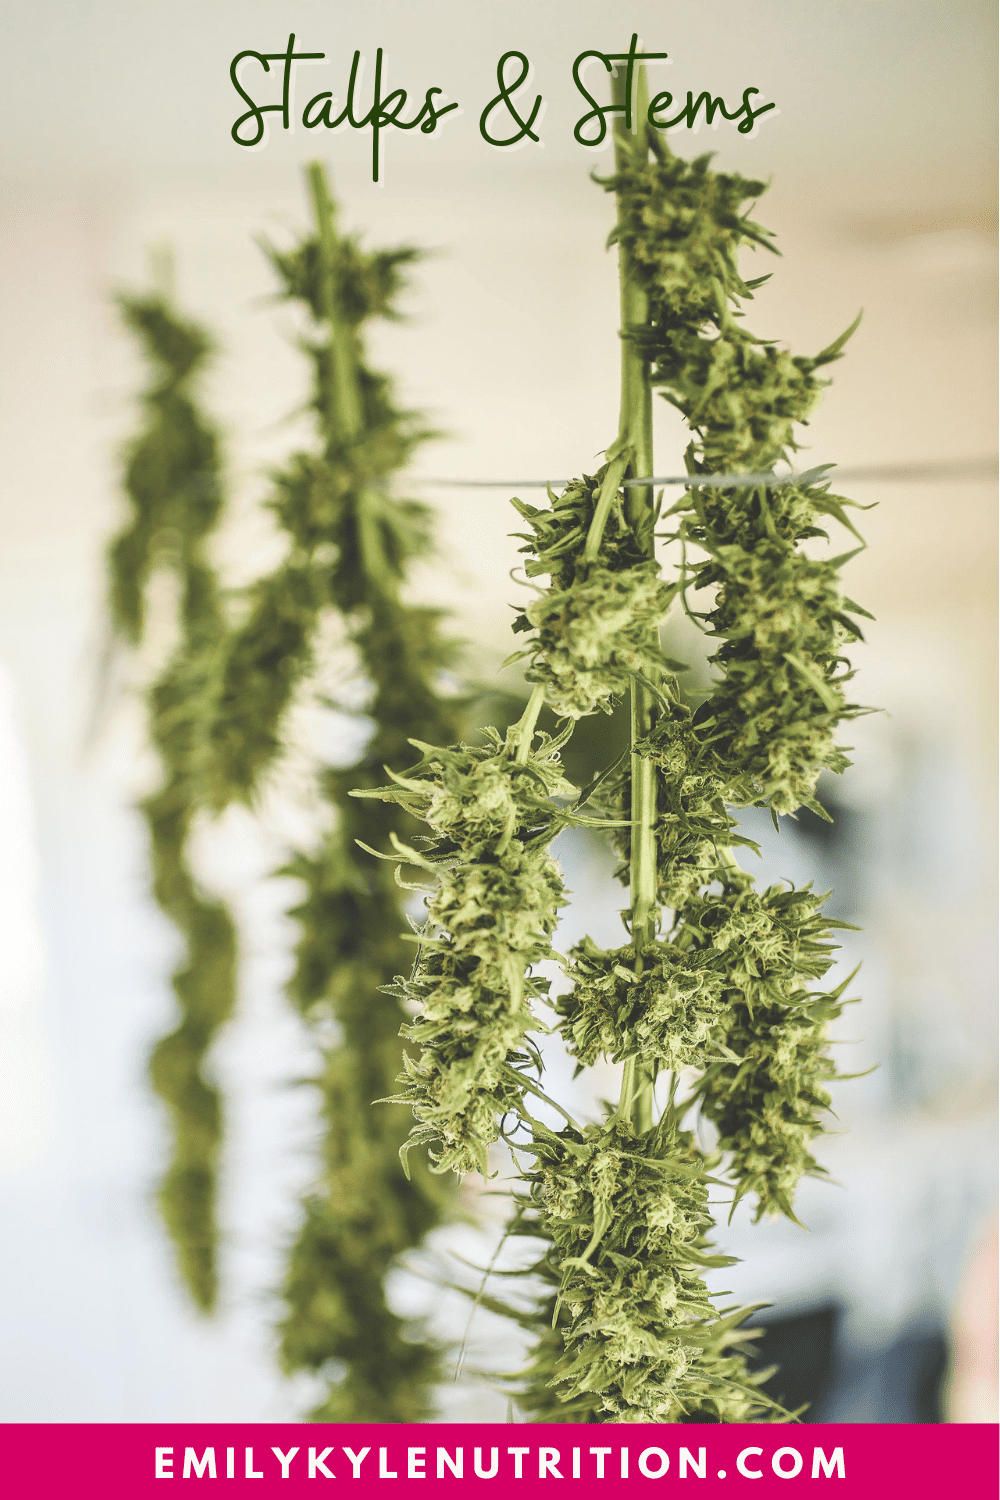 A picture of cannabis plants hanging by their stalks.